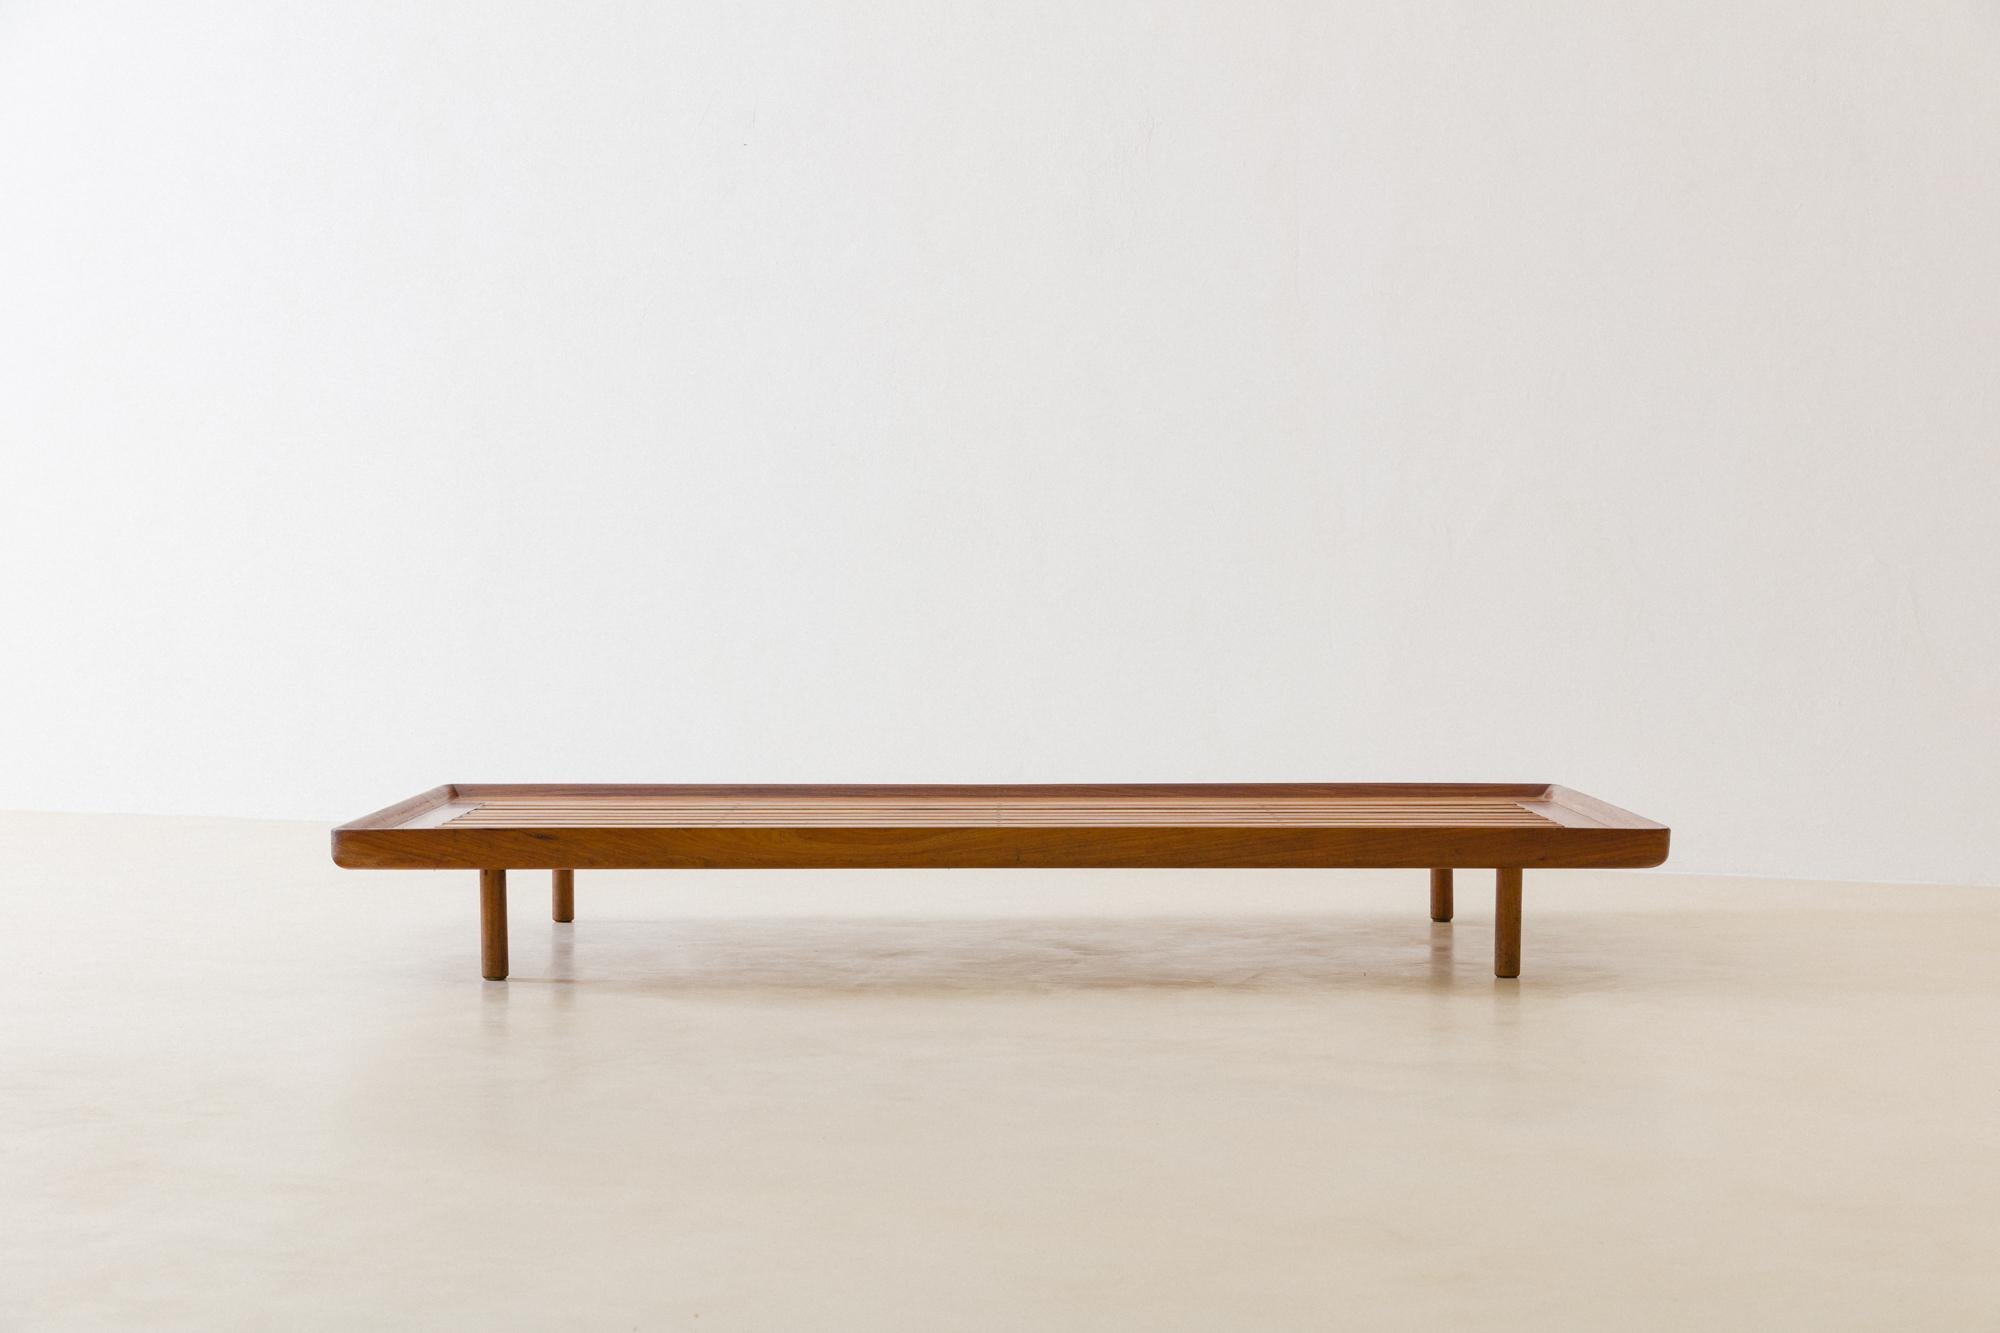 Midcentury Brazilian Rosewood Luxor Daybed by Sergio Rodrigues, 1962 For Sale 2